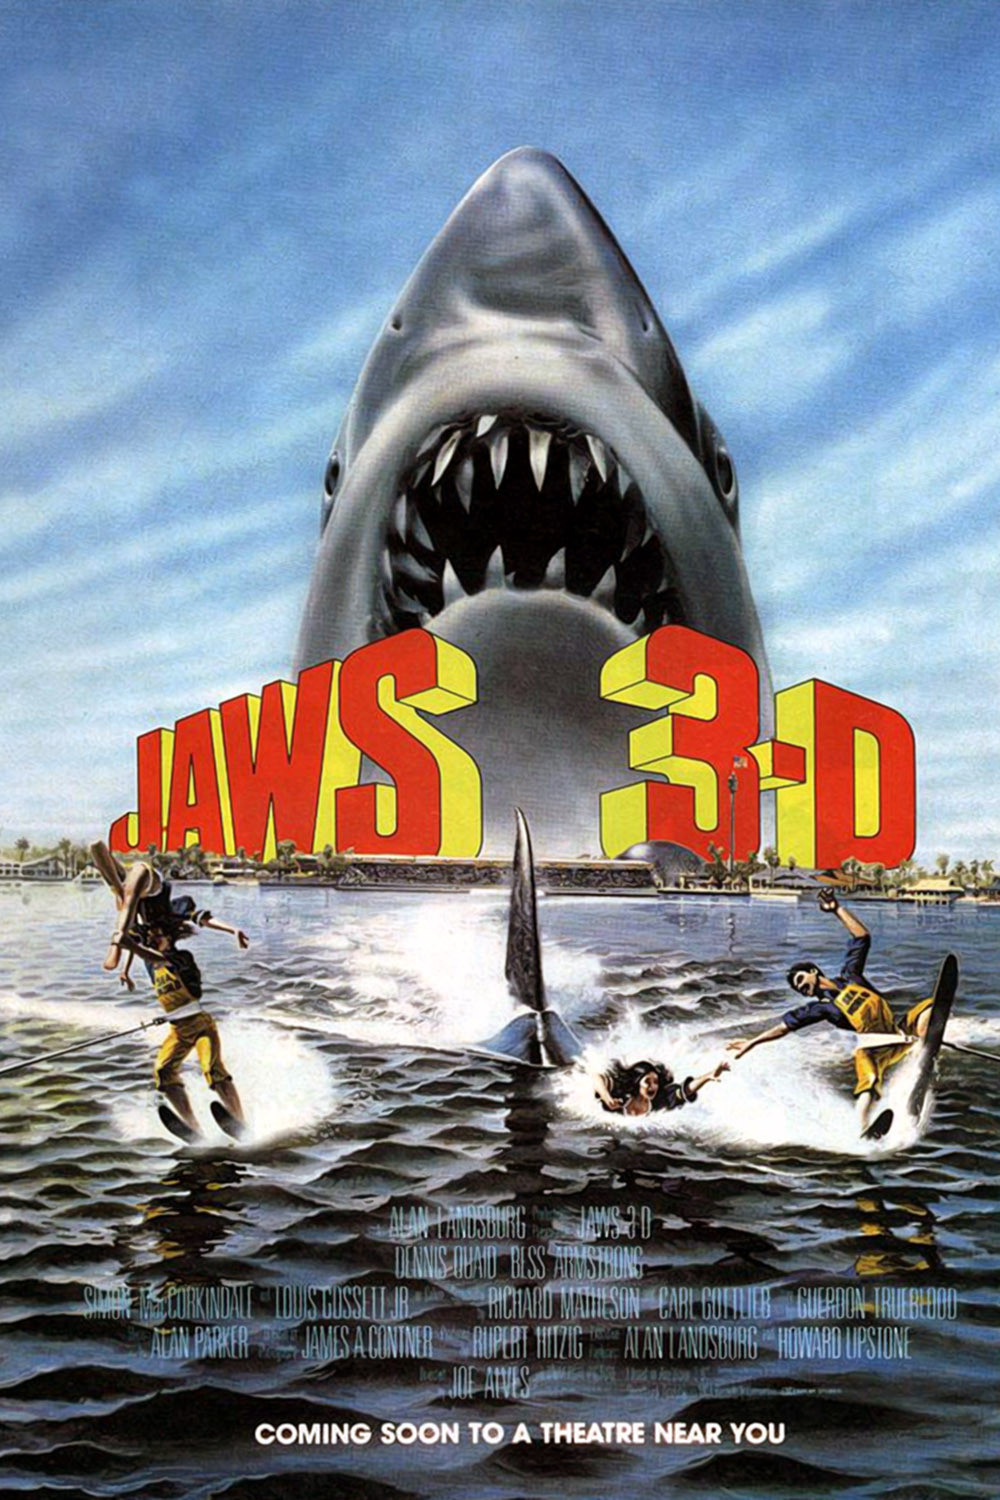 jaws3dposter1